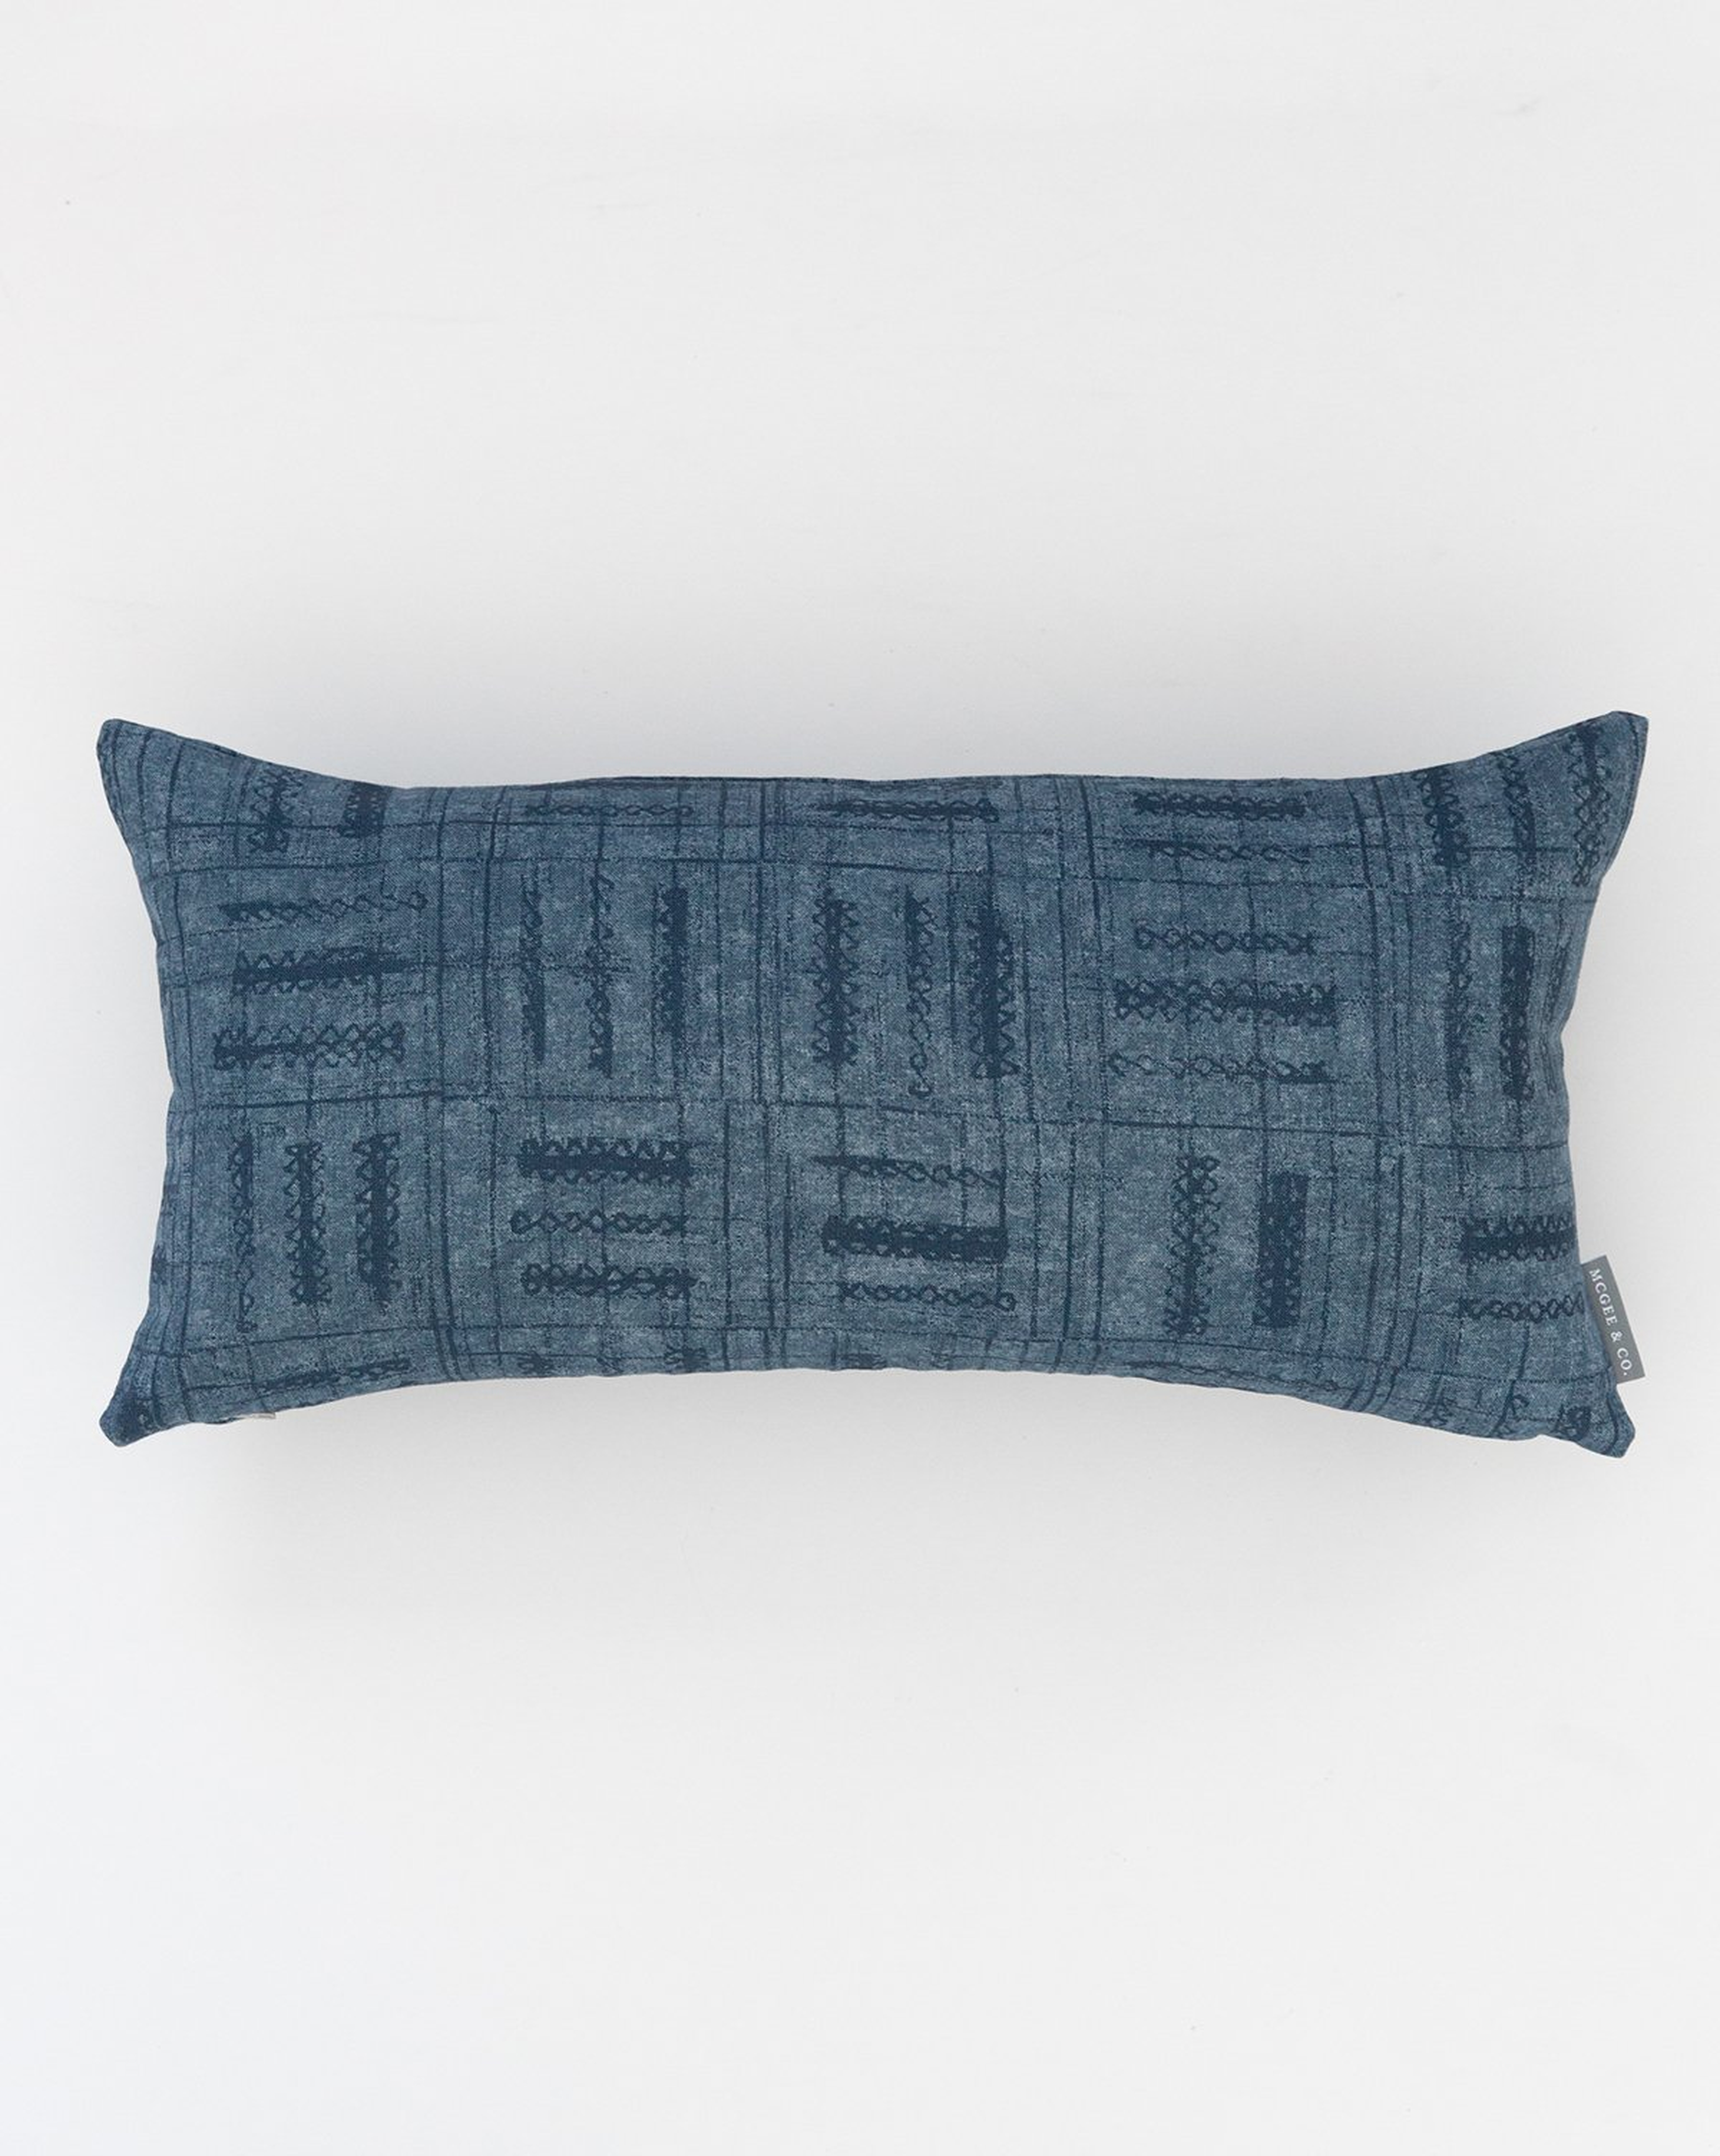 AMORET PILLOW WITHOUT INSERT, 12" x 24" - McGee & Co.